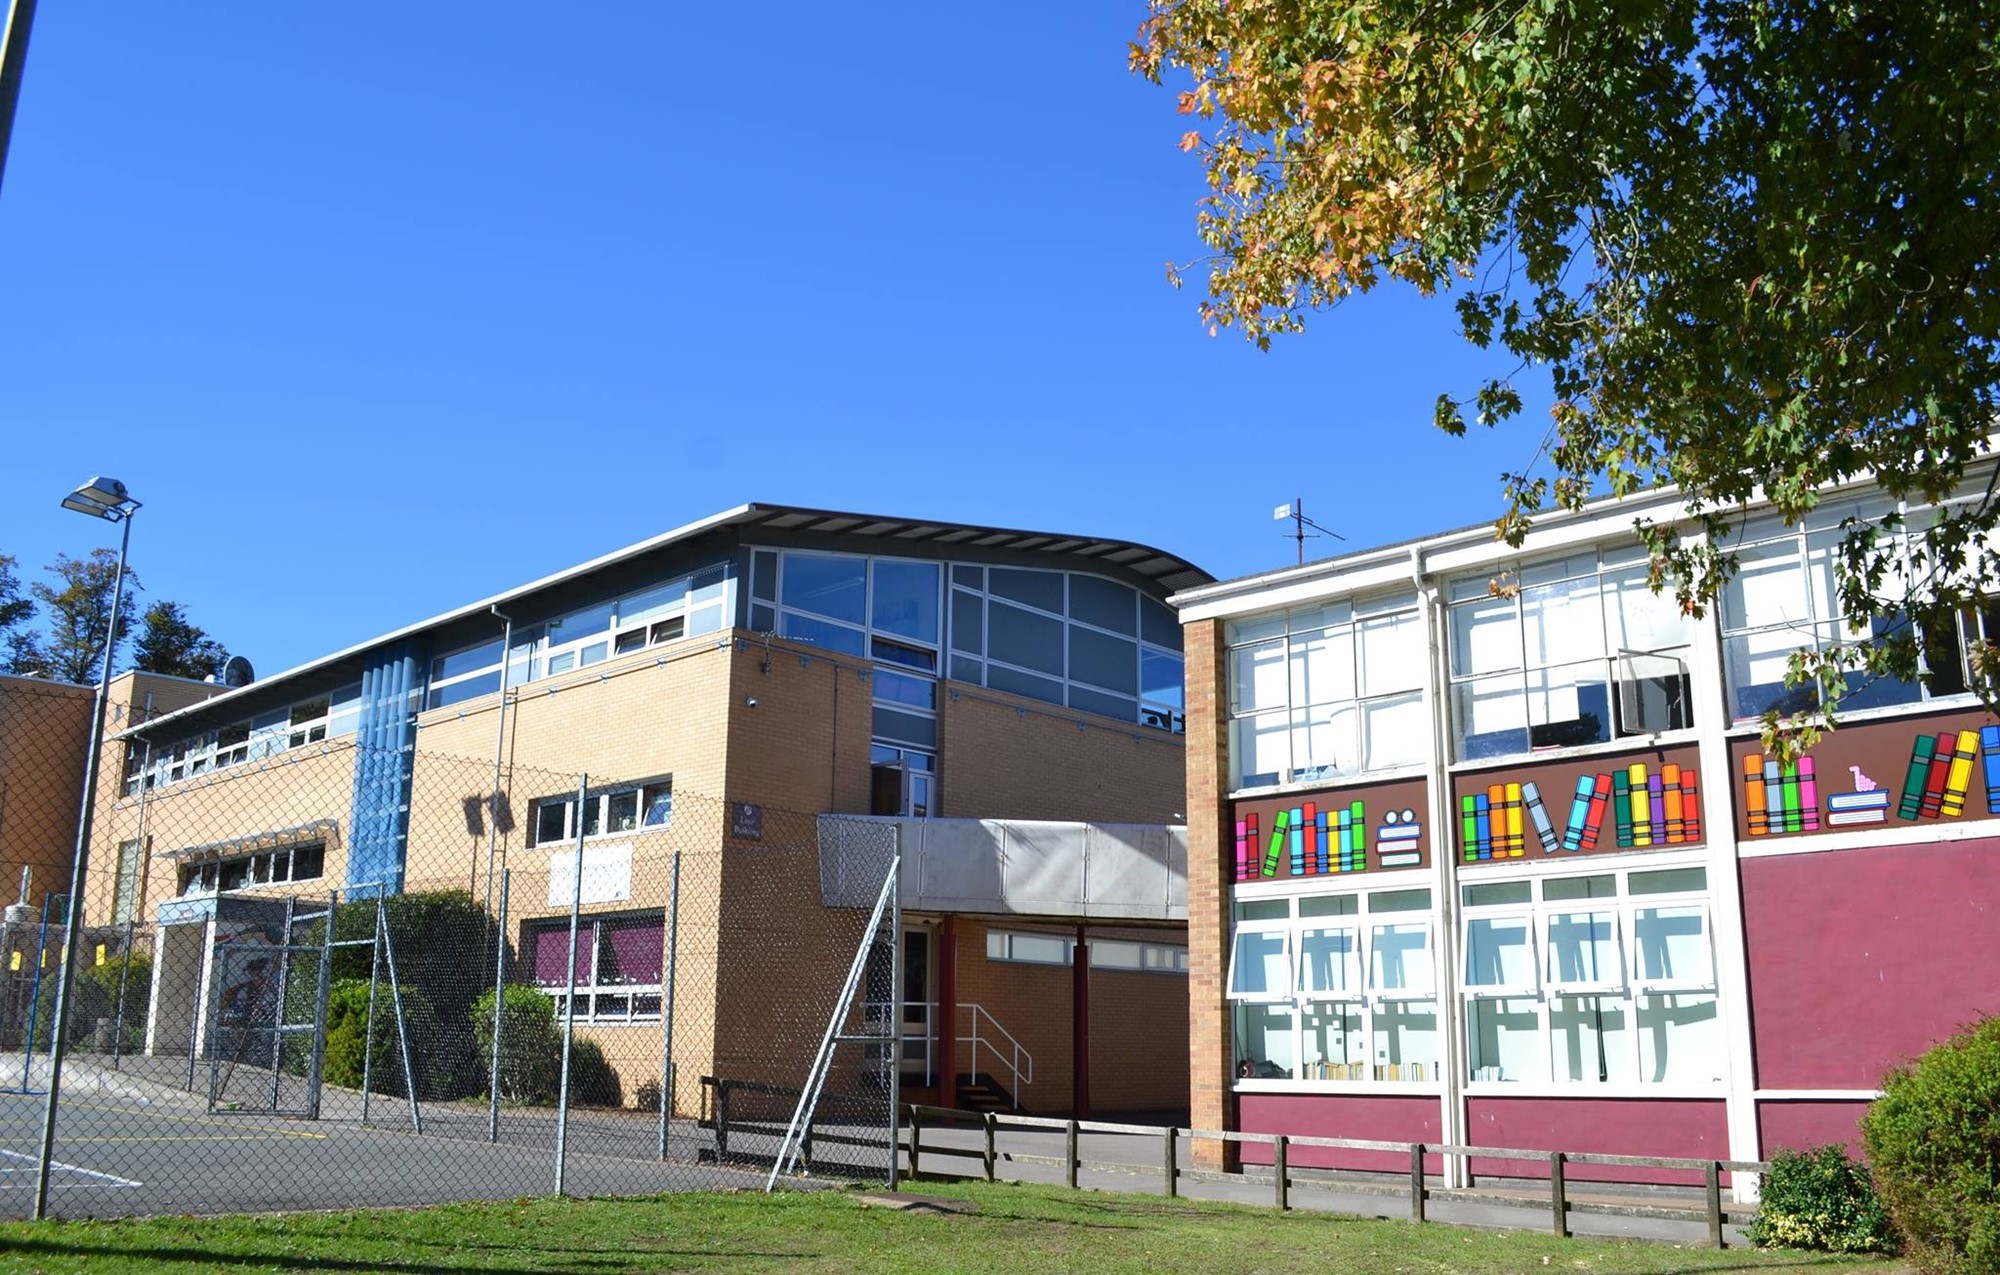 Schools and academic trust water system and legionella prevention programmes